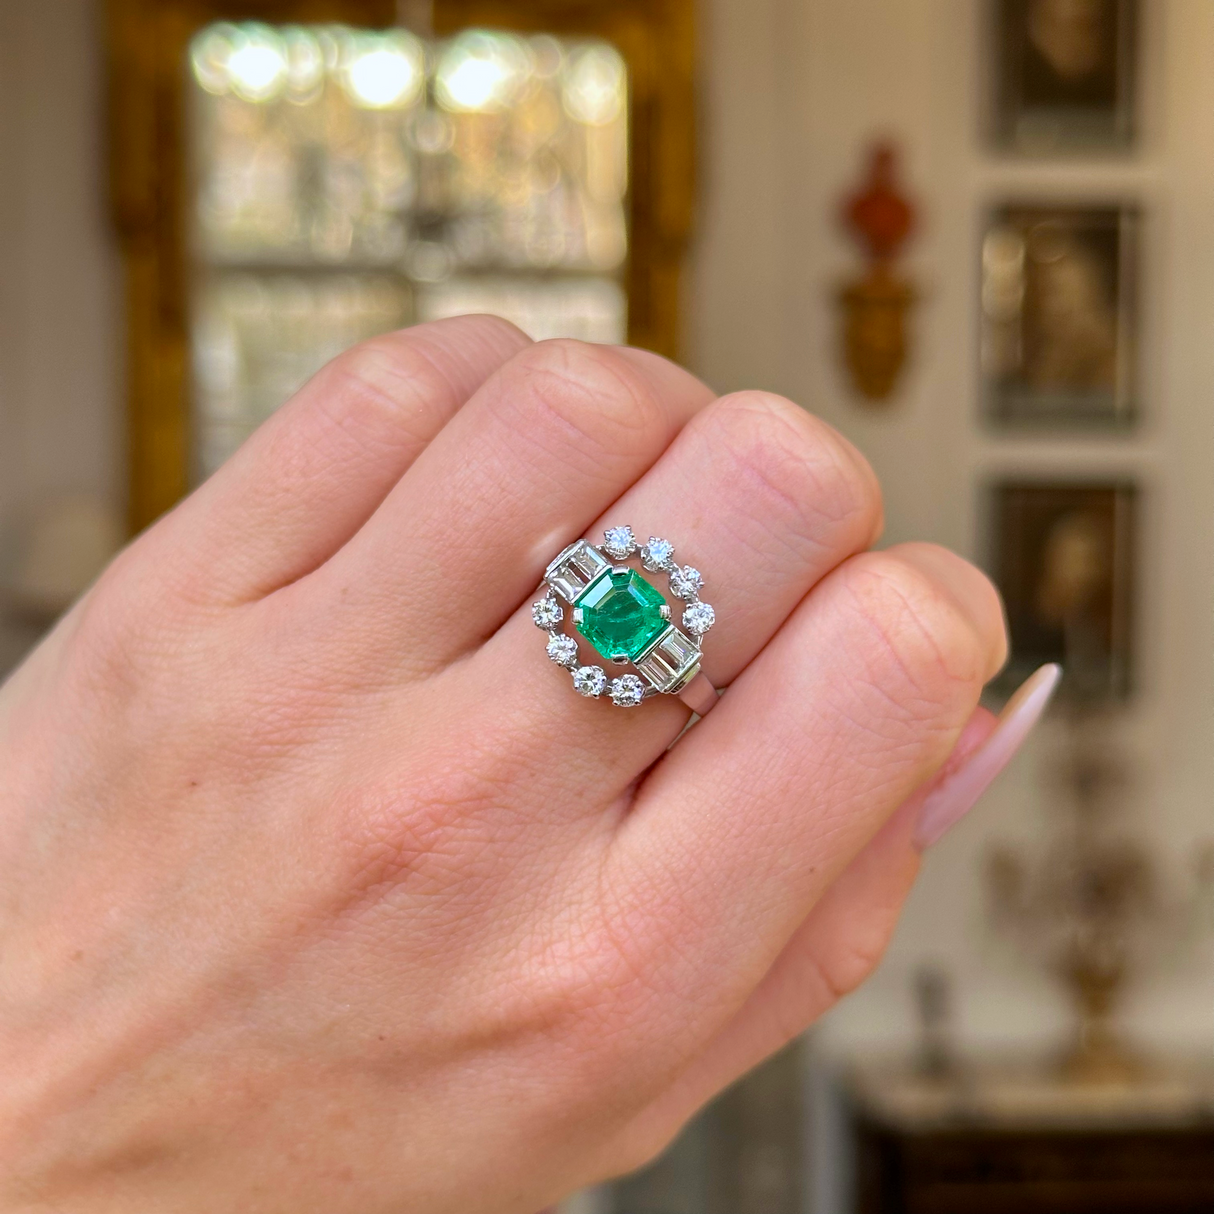 Vintage emerald and diamond ring worn on  closed hand. 